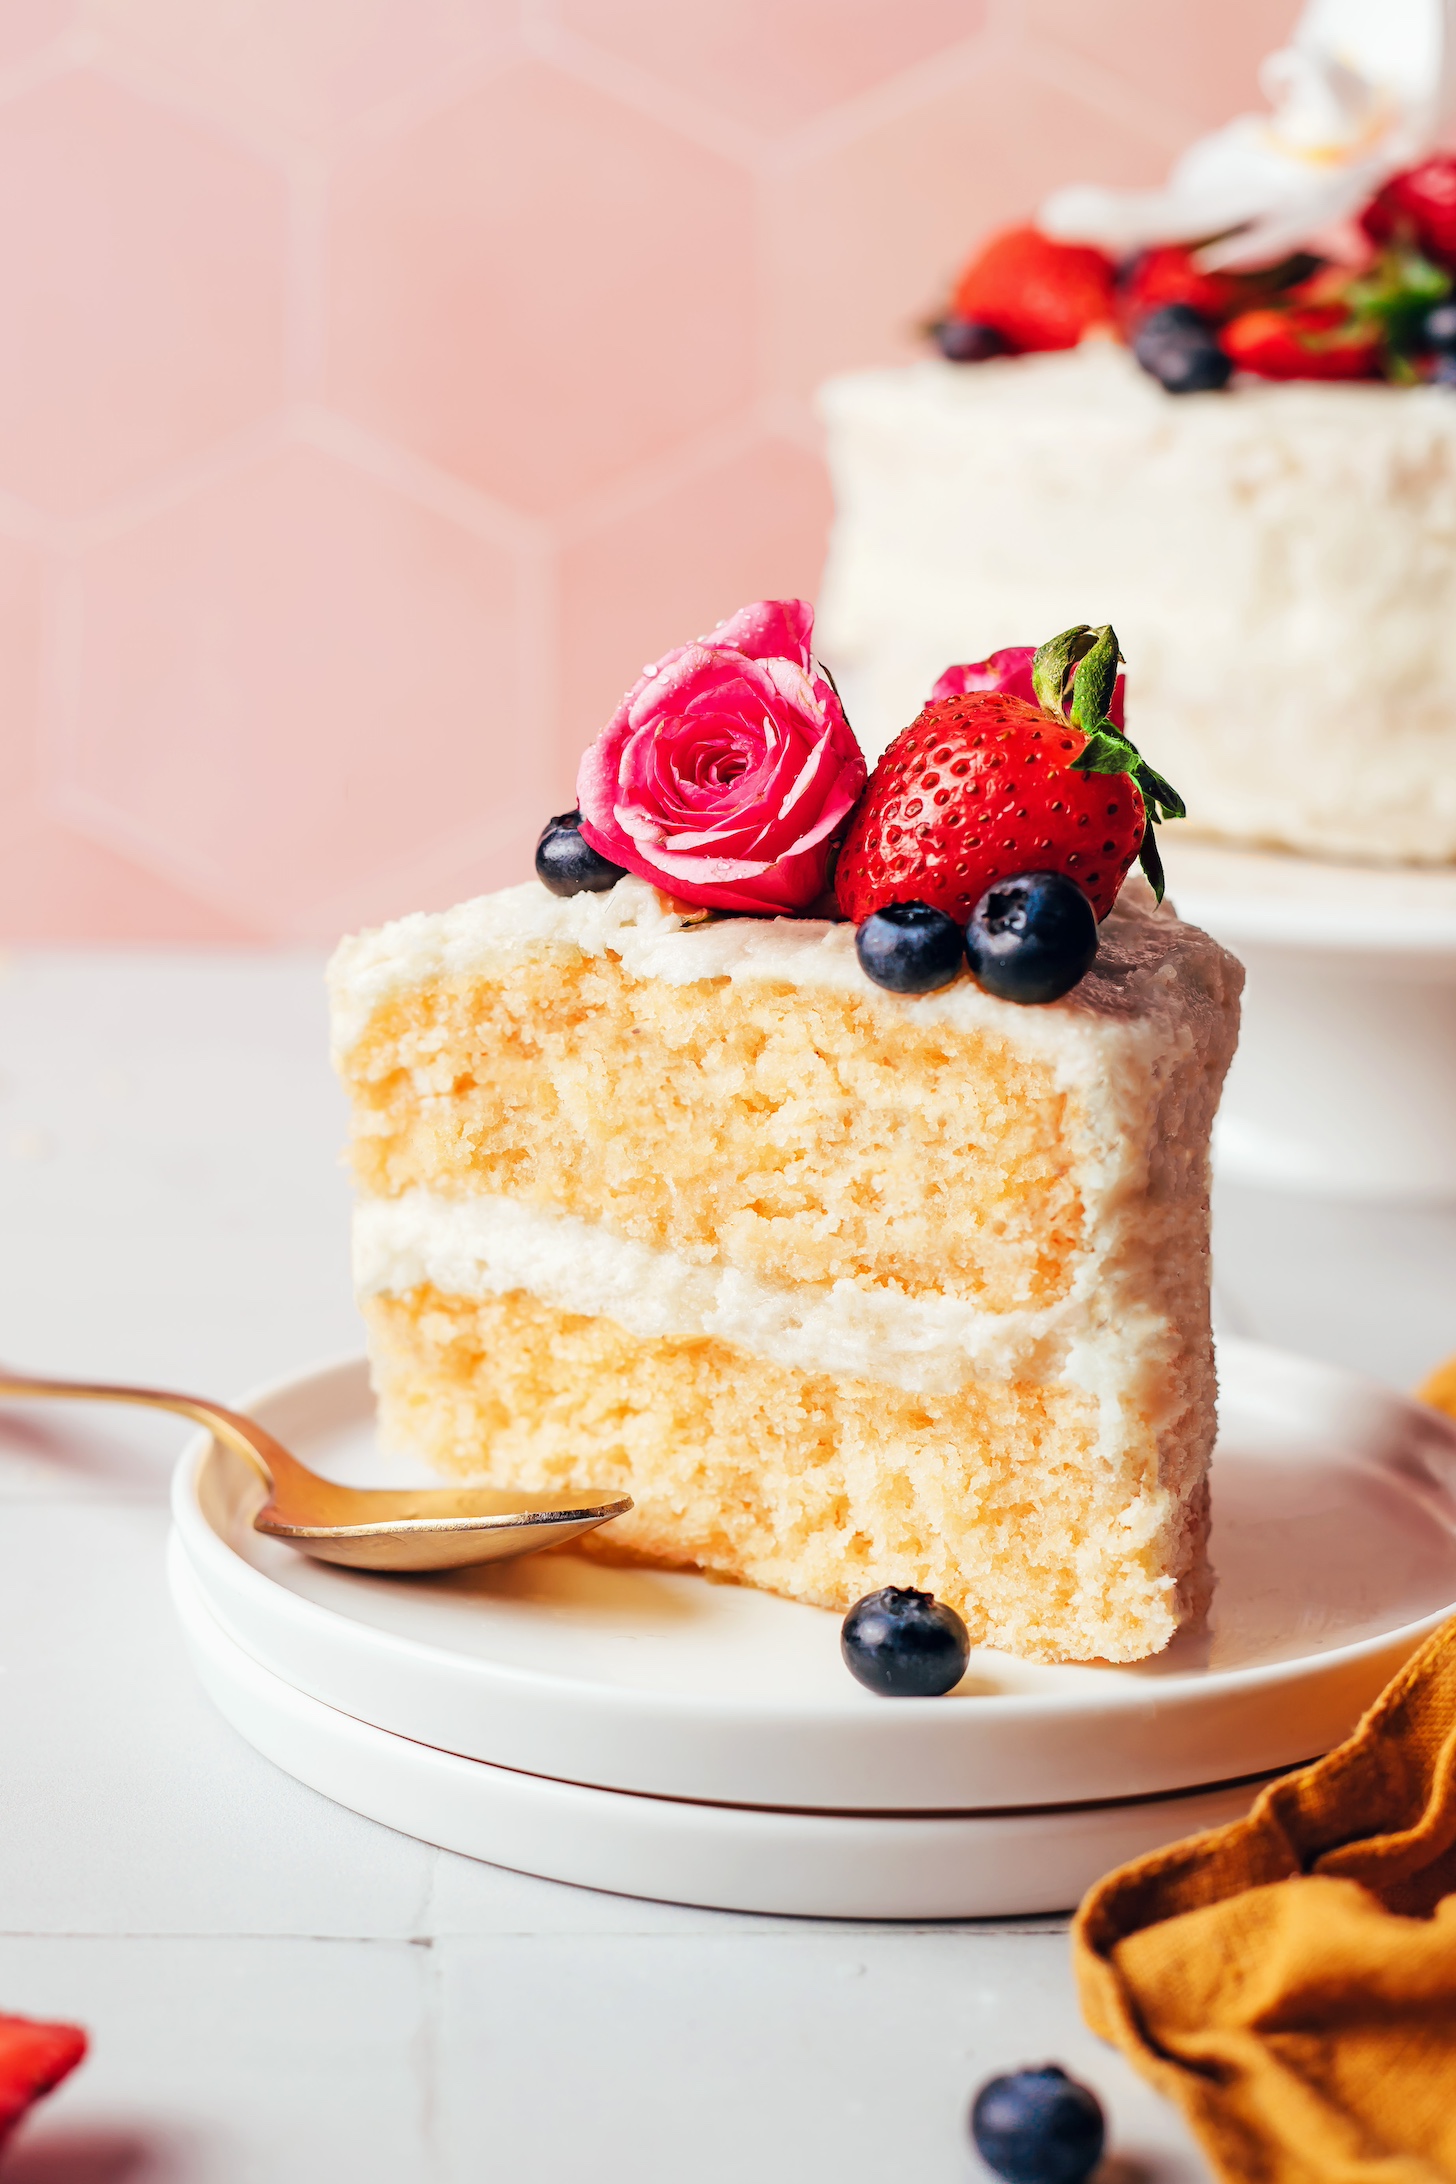 Slice of gluten-free vanilla cake decorated with vanilla buttercream frosting and fresh berries